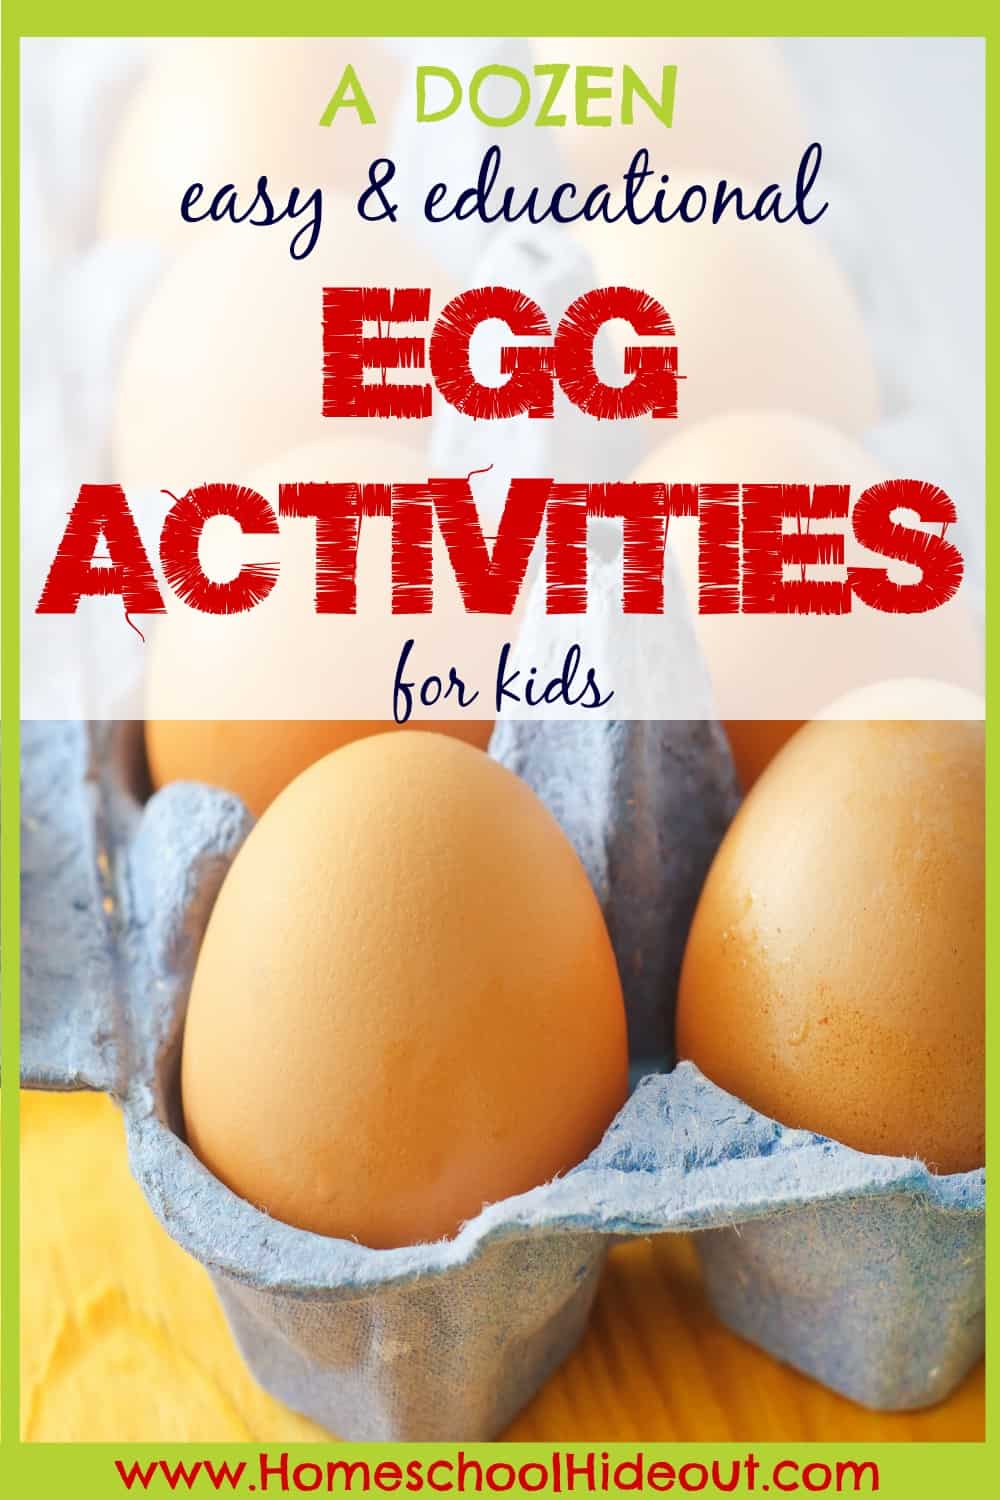 Spring has sprung! These educational egg activities are perfect for some hands-on learning with little supplies needed!